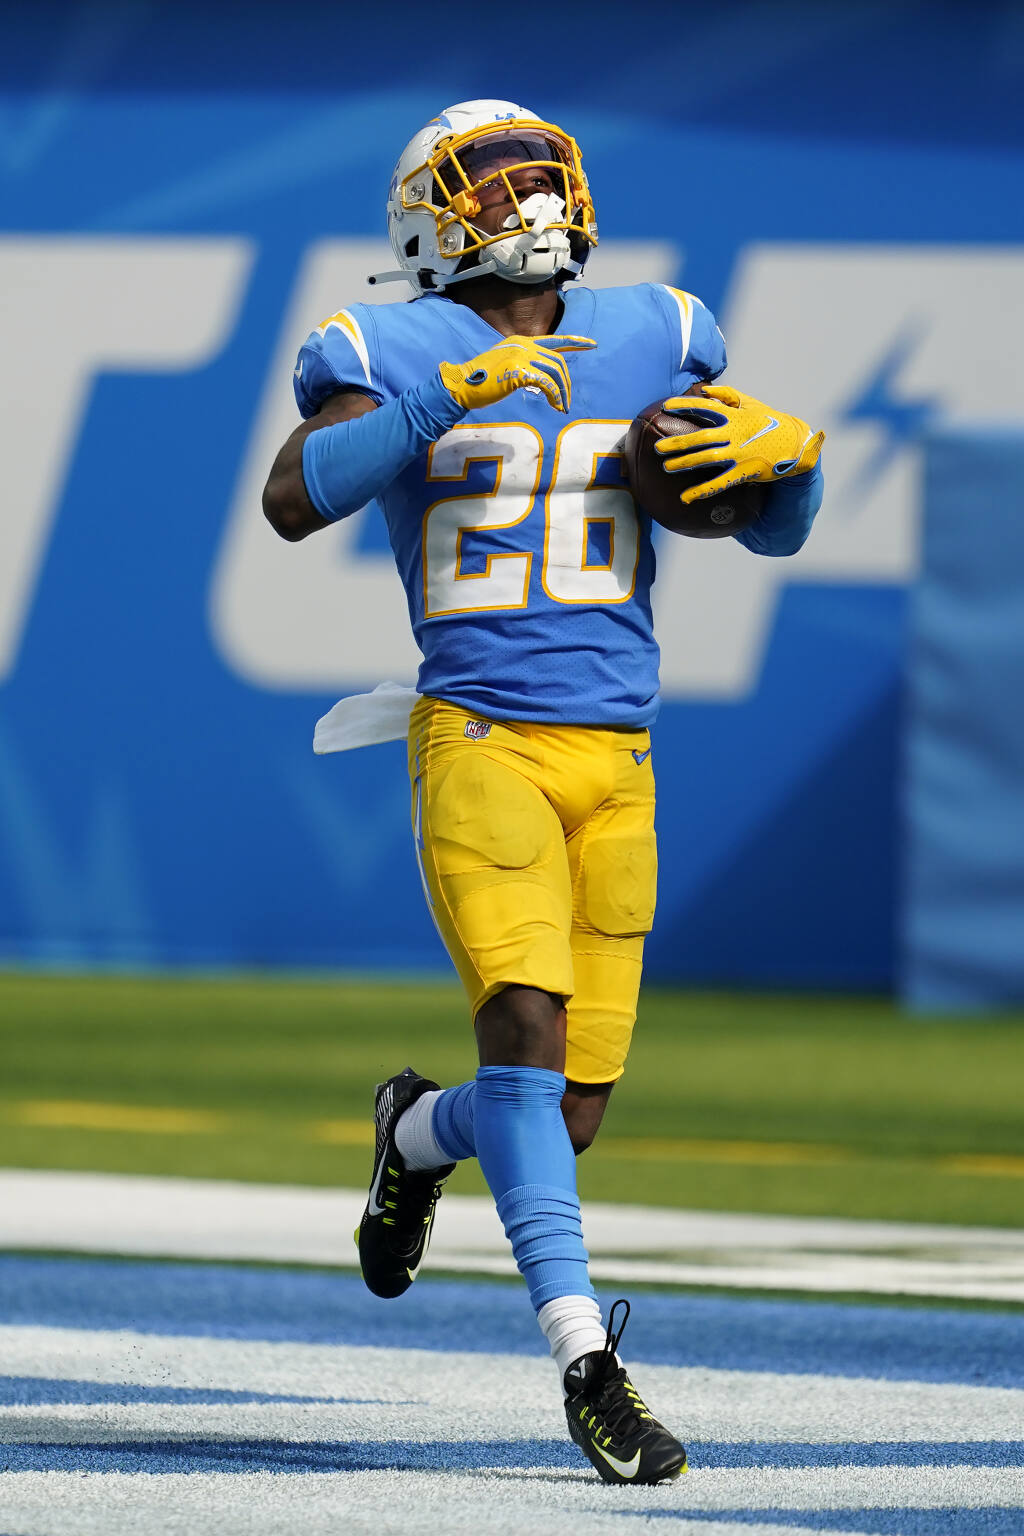 Chargers switching to powder blues as their primary uniform